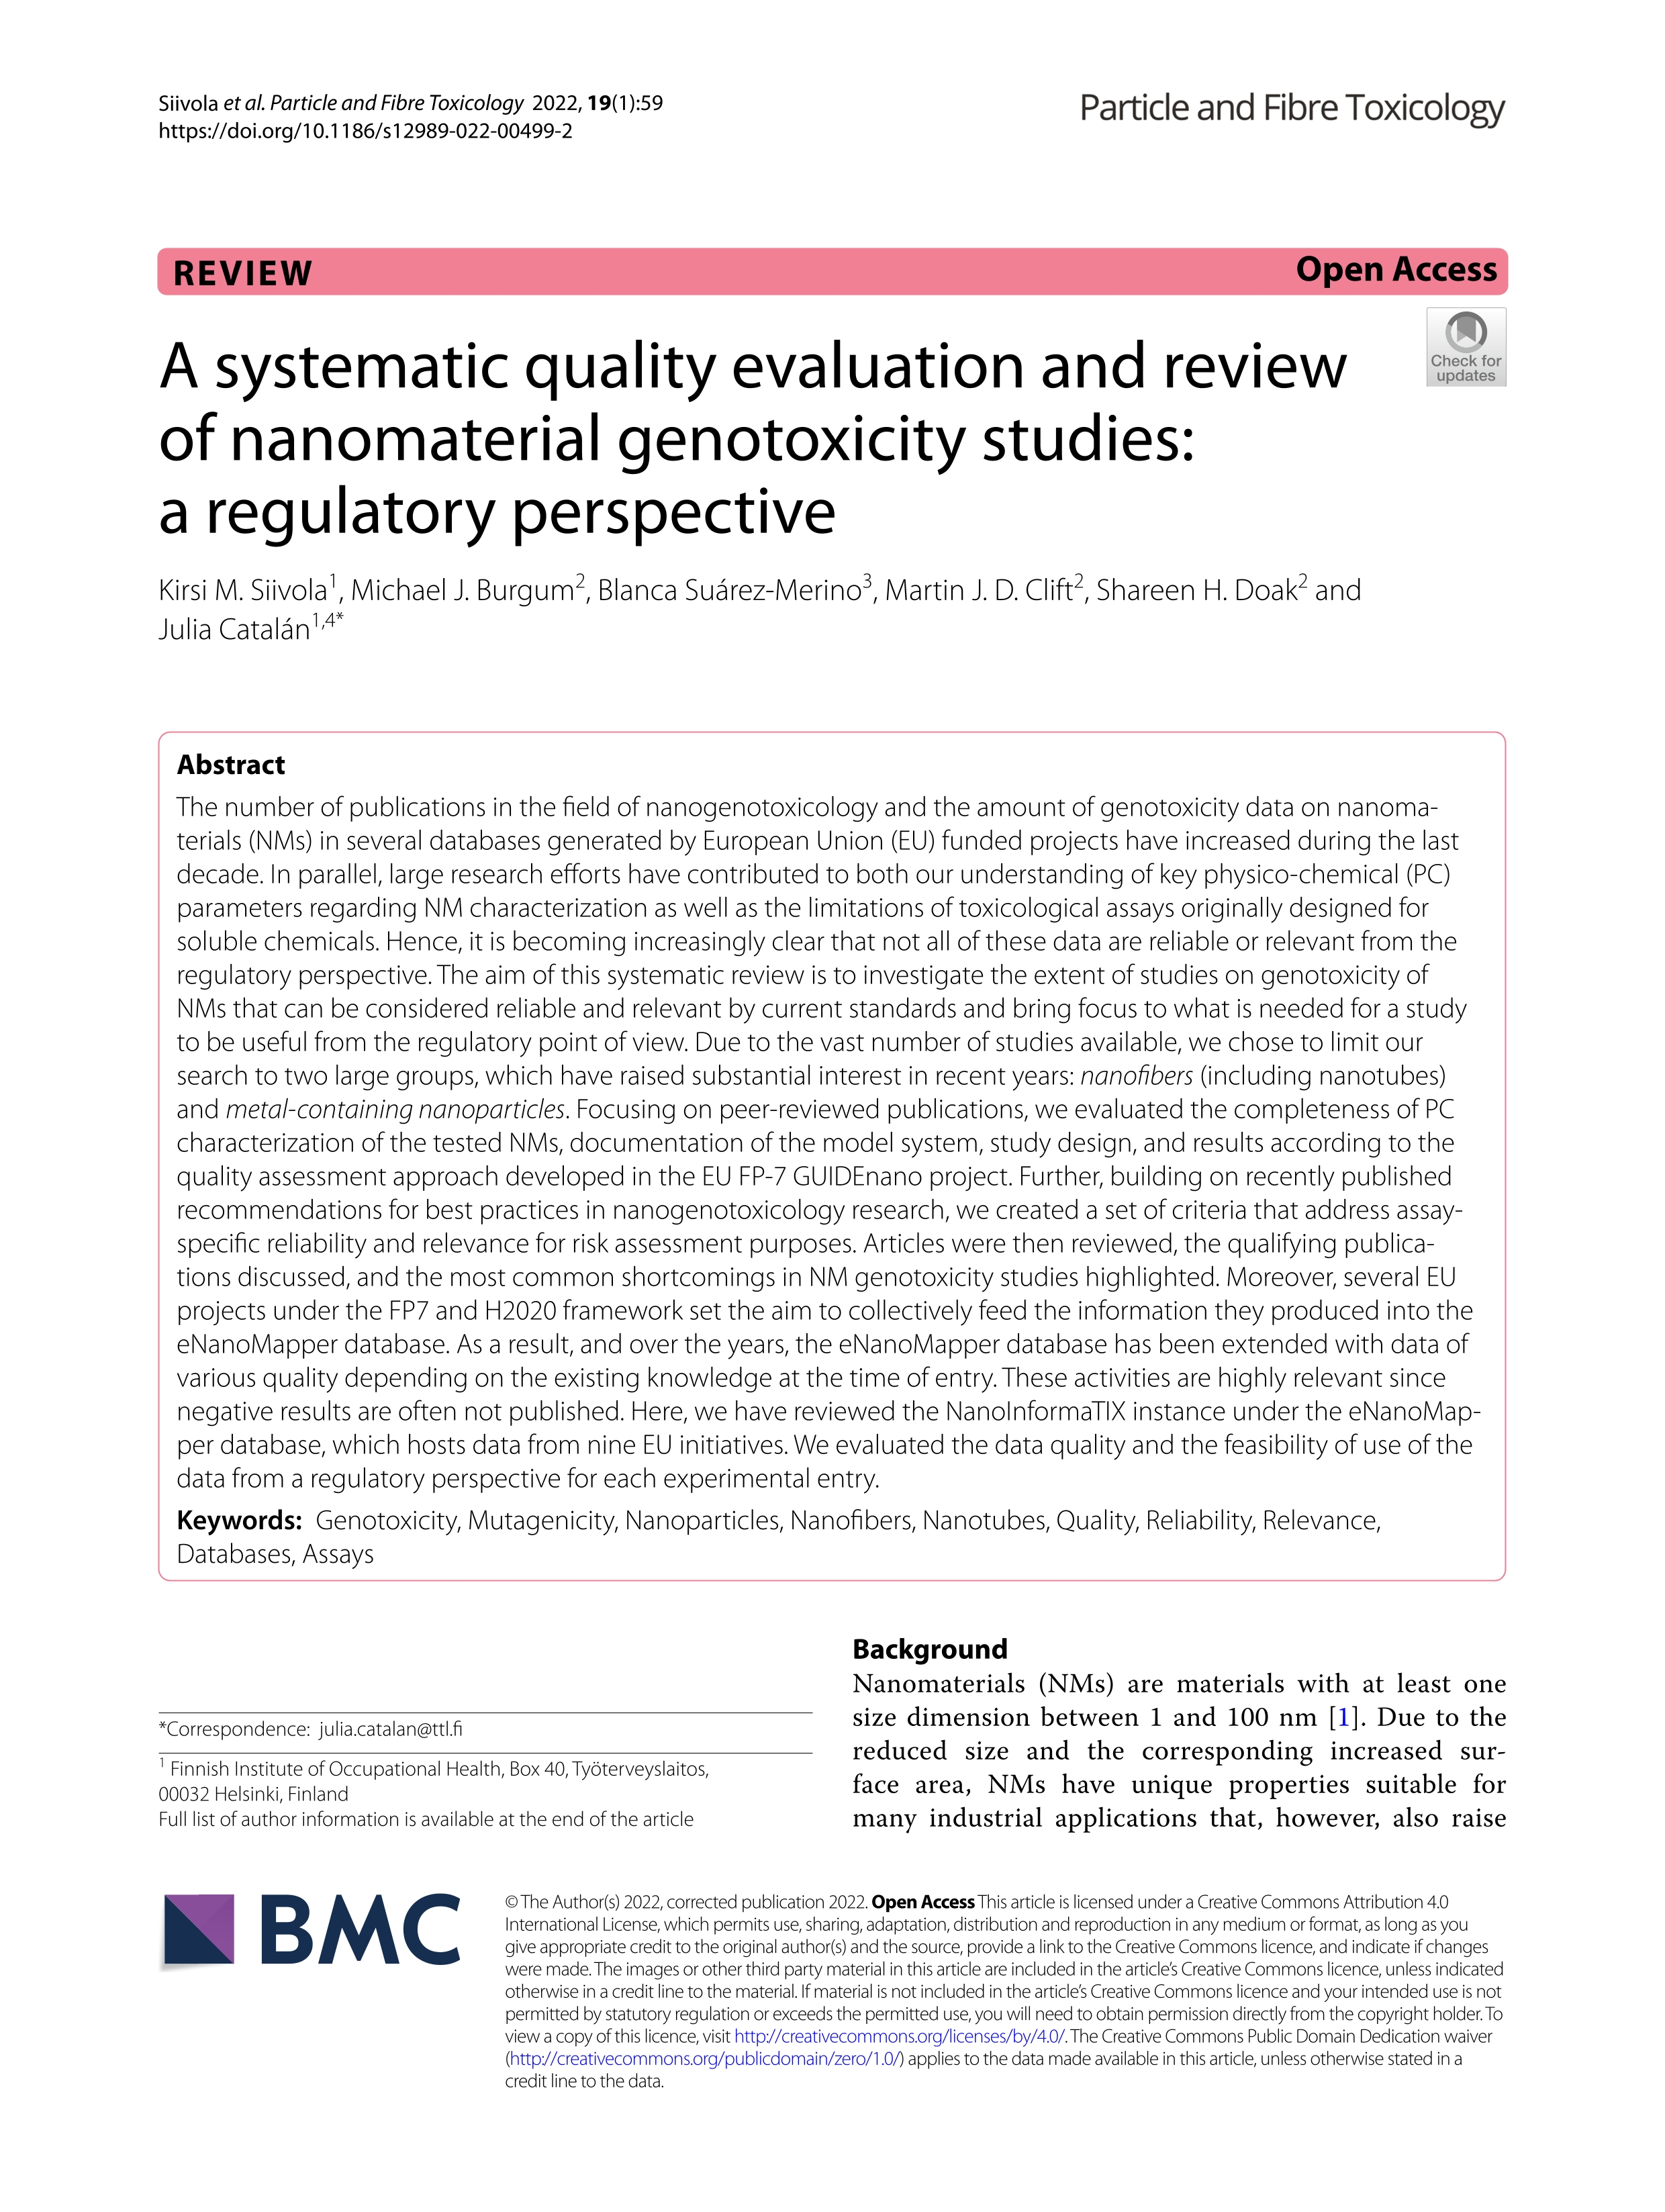 A systematic quality evaluation and review of nanomaterial genotoxicity studies: a regulatory perspective